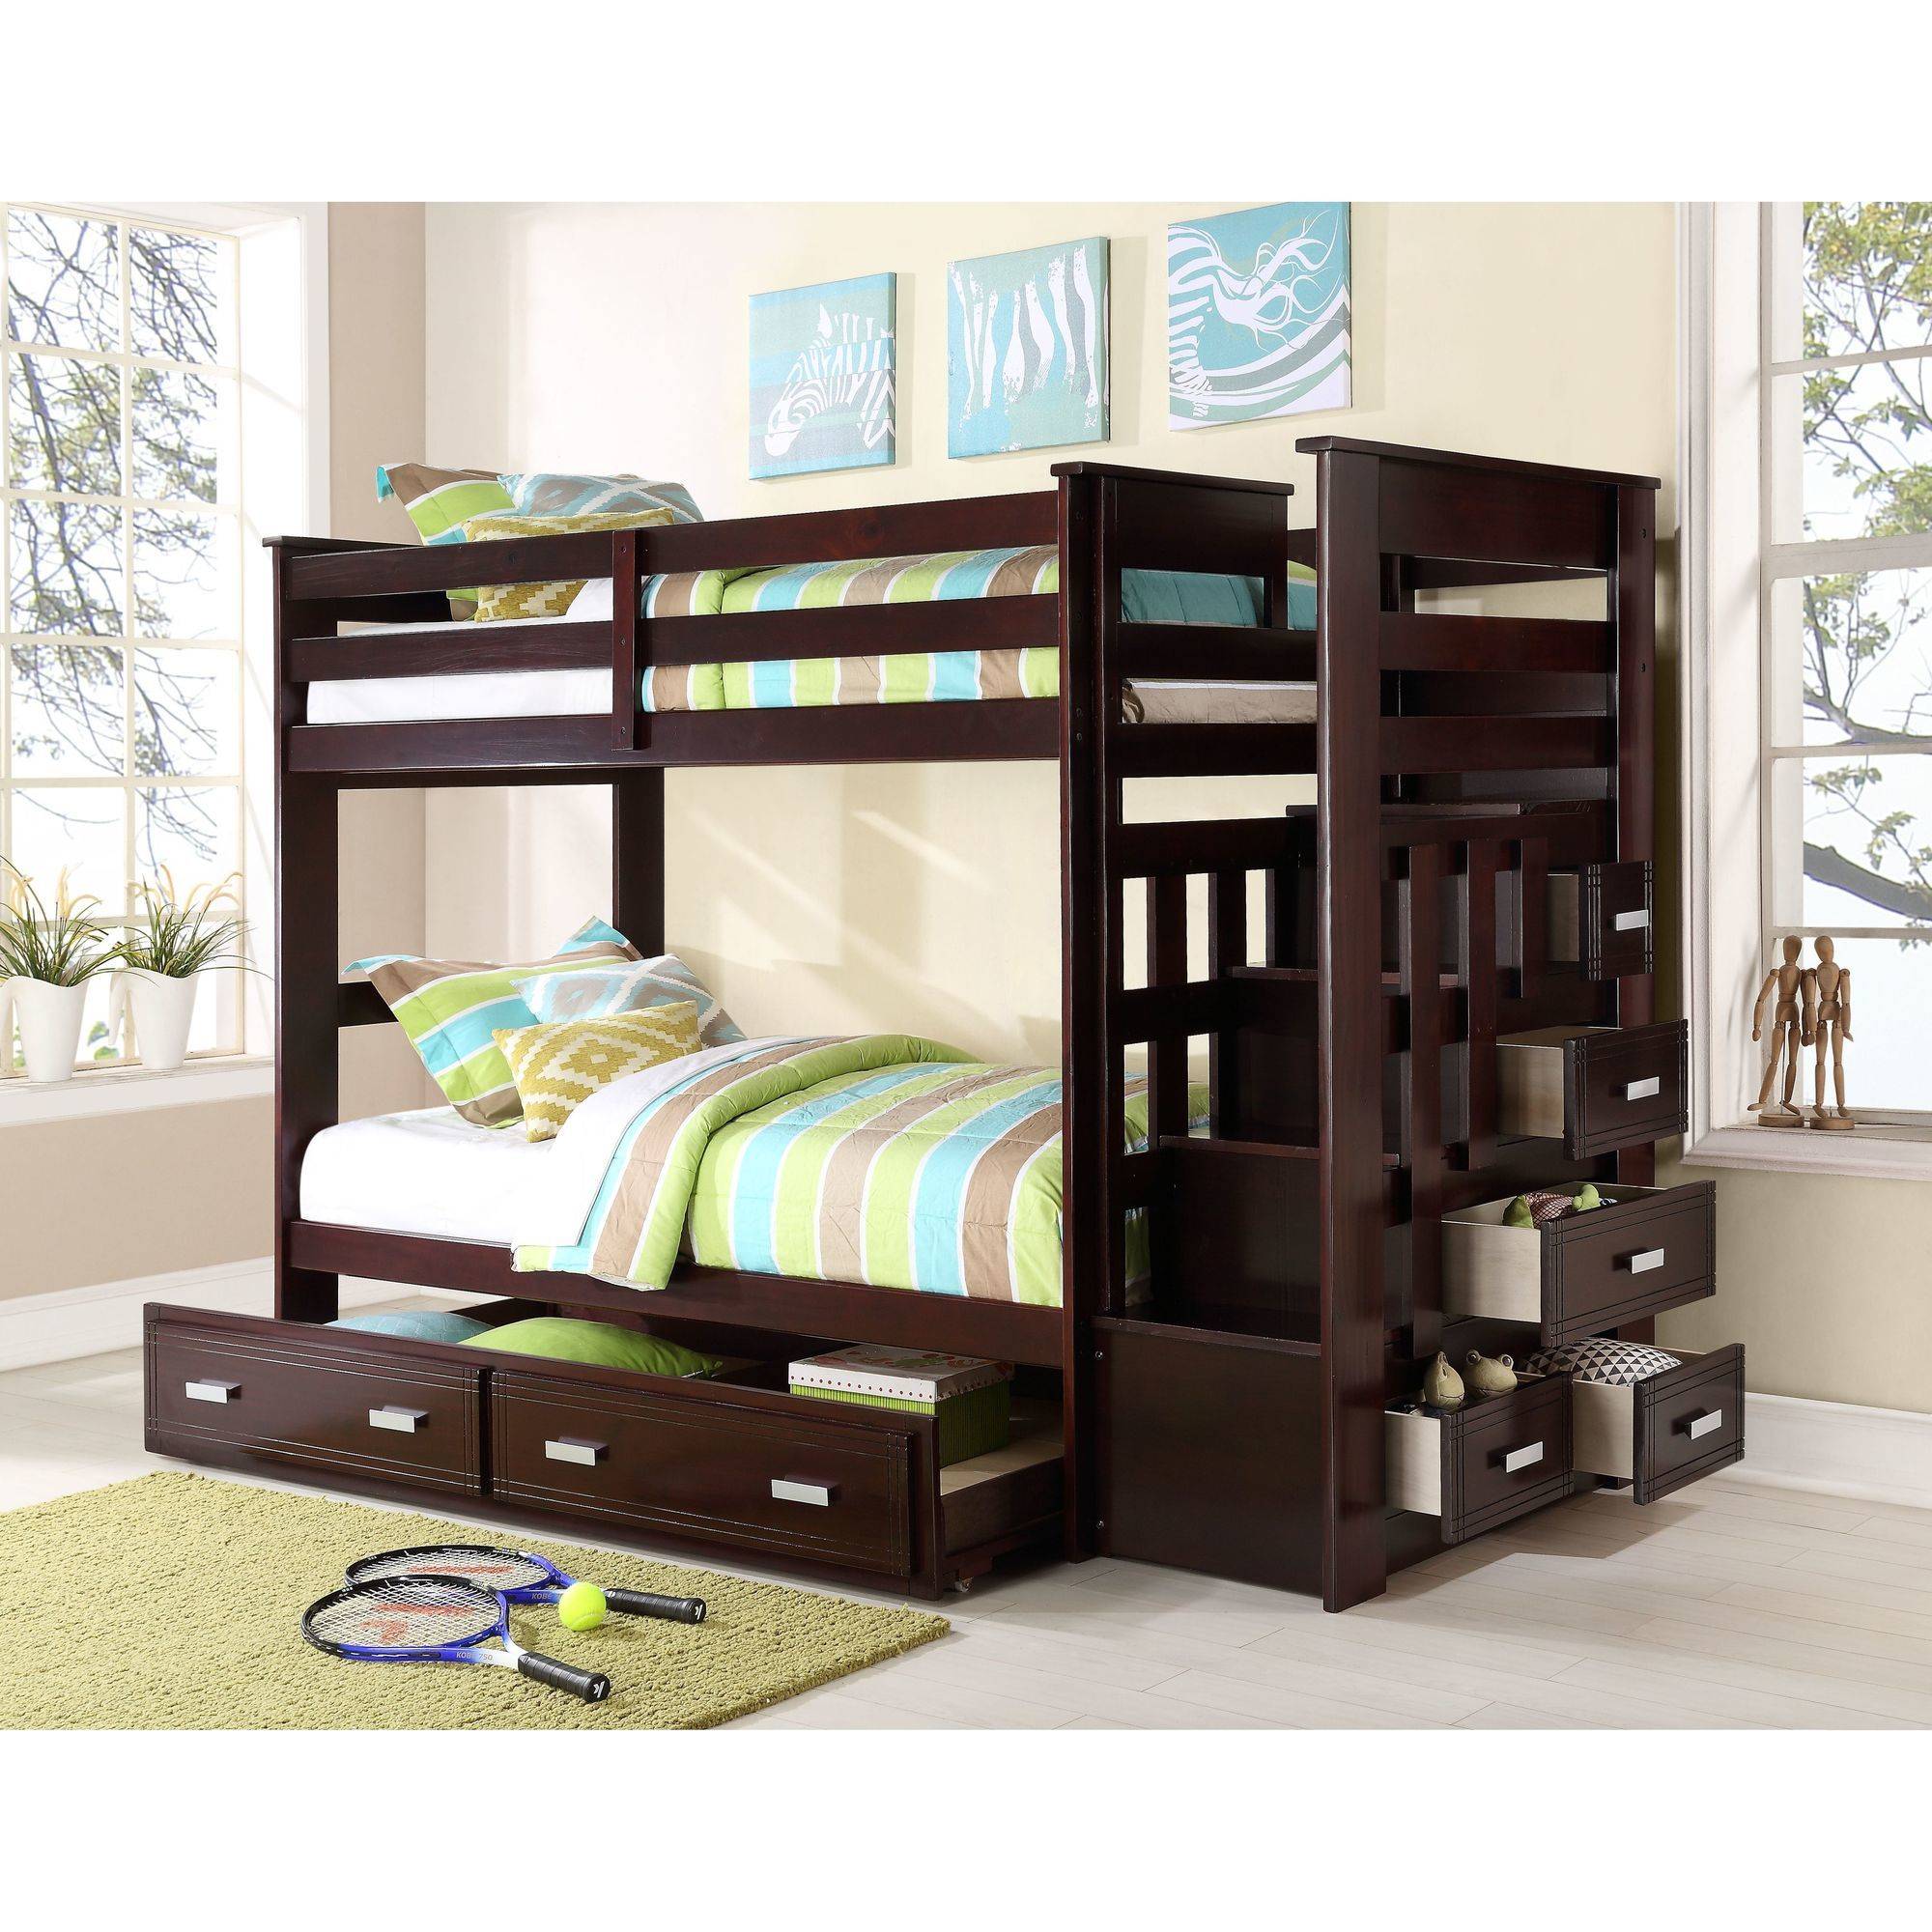 Allentown Twin over Twin Bunk Bed, Espresso - image 3 of 5